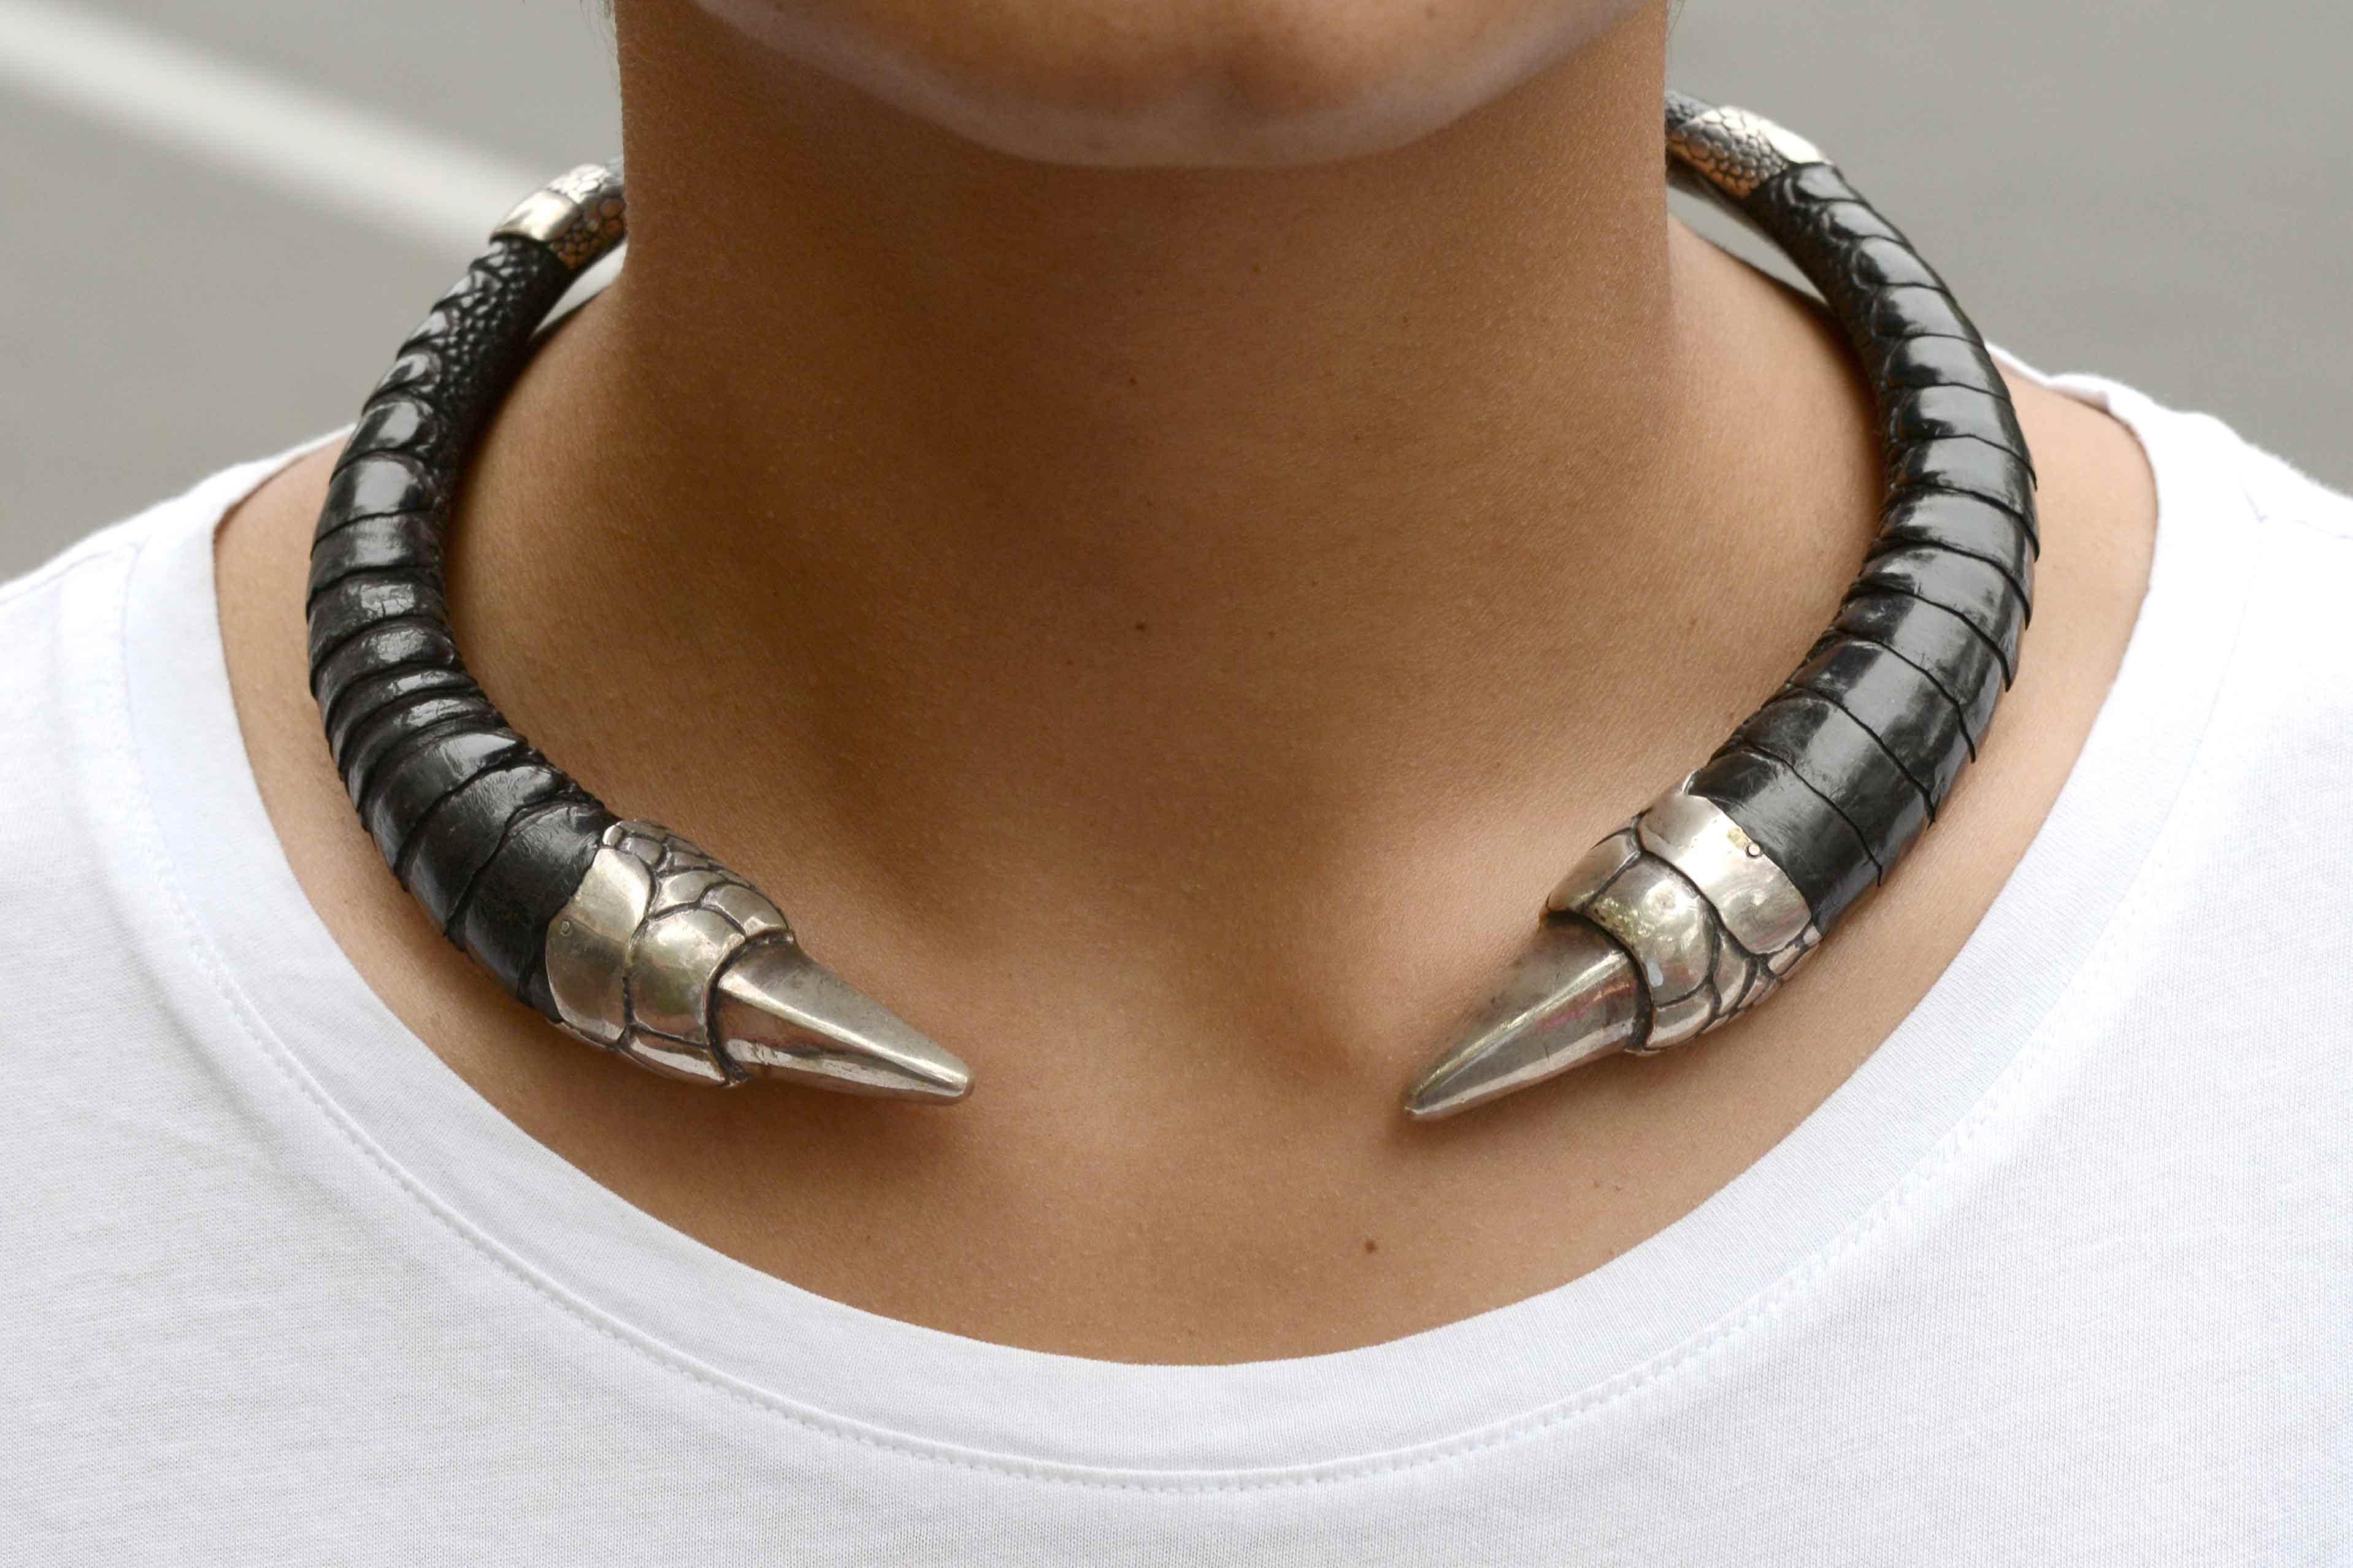 A fab Gothic style Medieval-inspired ostrich talon claw choker necklace. Handmade of sterling silver and ostrich leather by underground French artist Lou, this exotic work makes a bold statement and will definitely raise a few eyebrows. Each bespoke